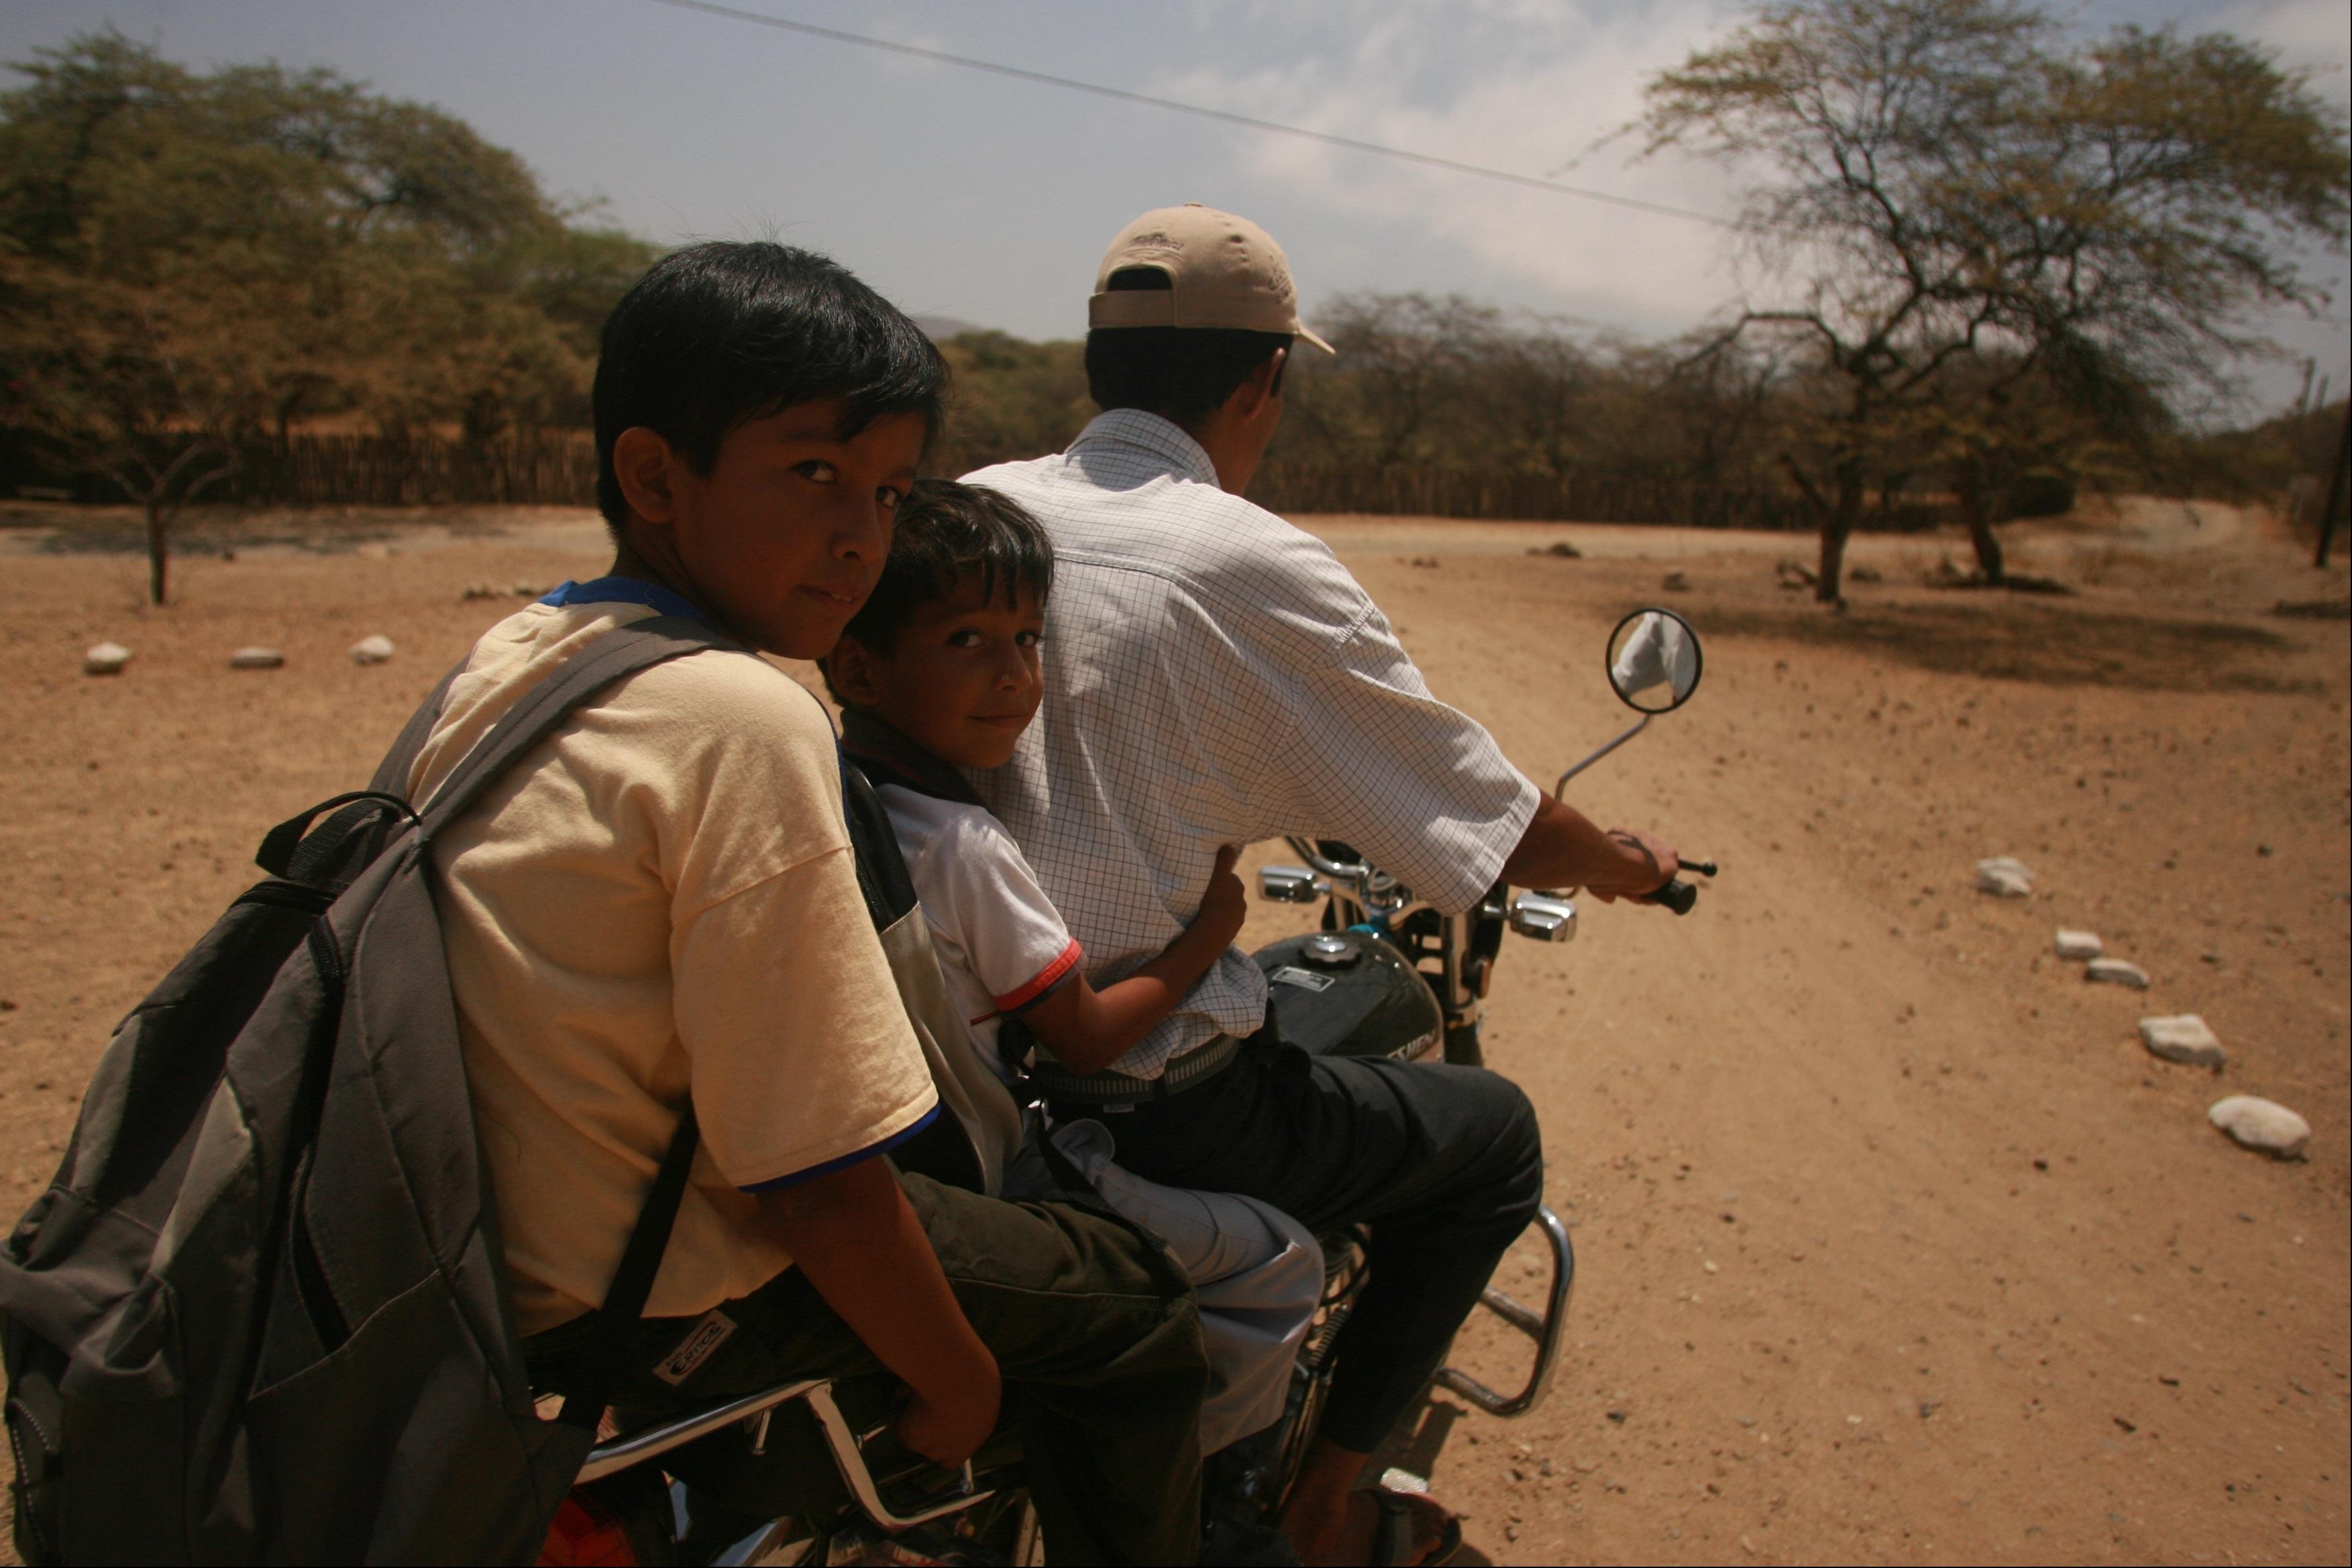 Father and two boys on a motorbike